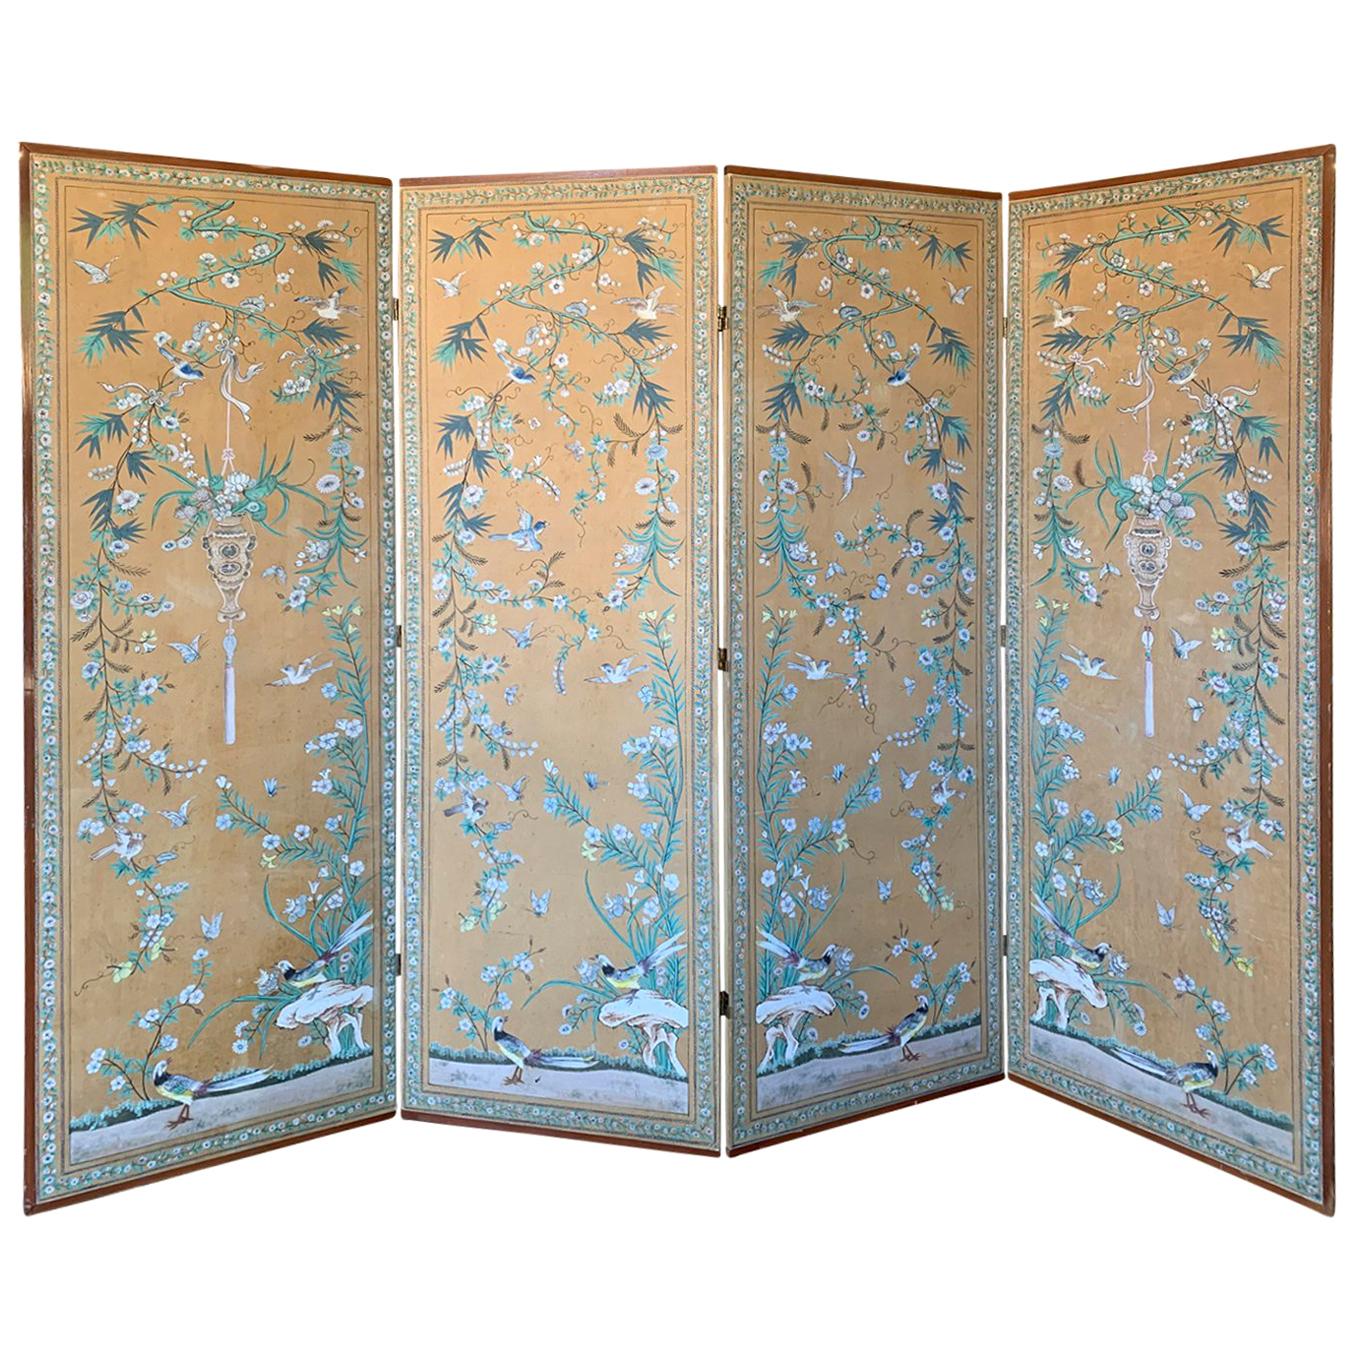 20th Century Chinese Chinoiserie Four-Panel Paper Screen